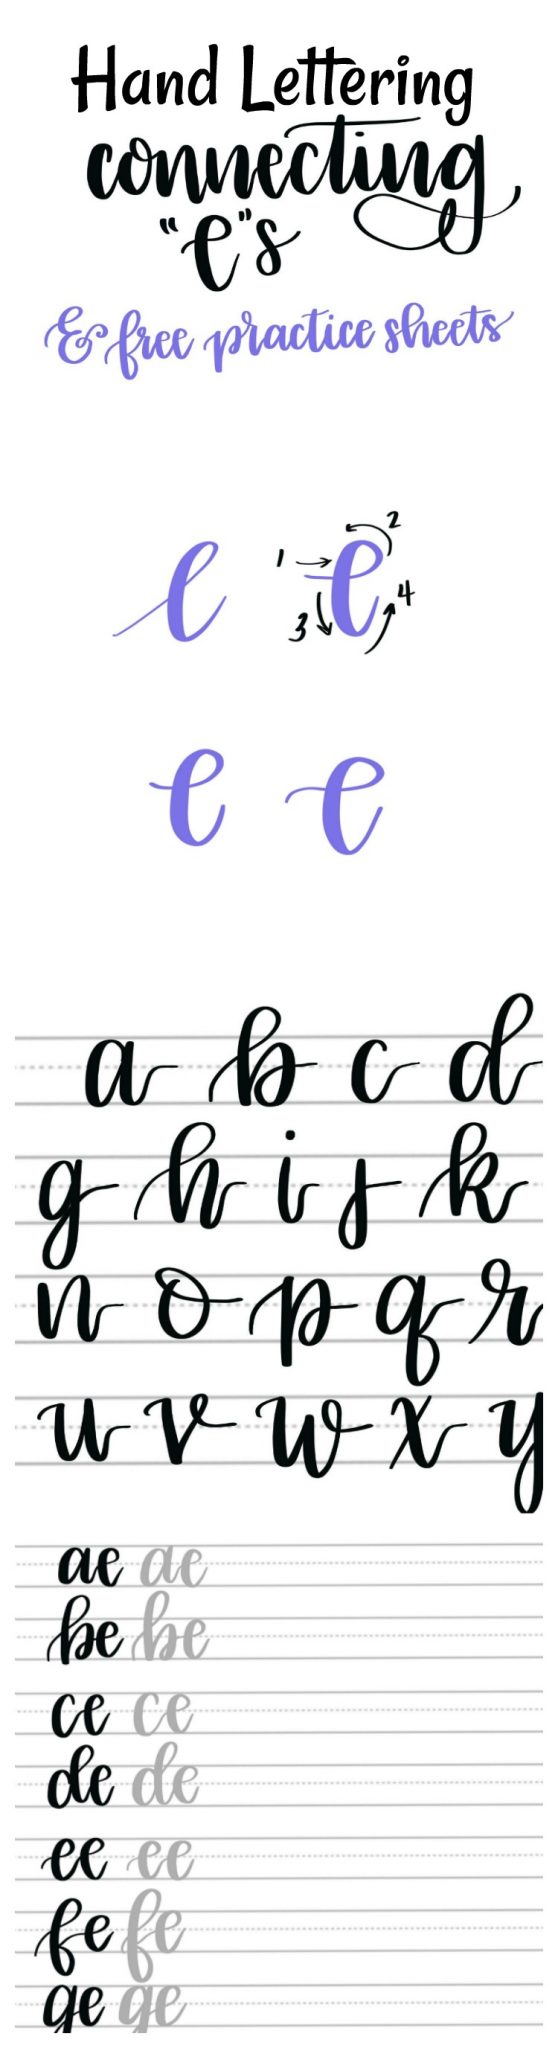 Hand Lettering Practice Pages: Connecting Letters